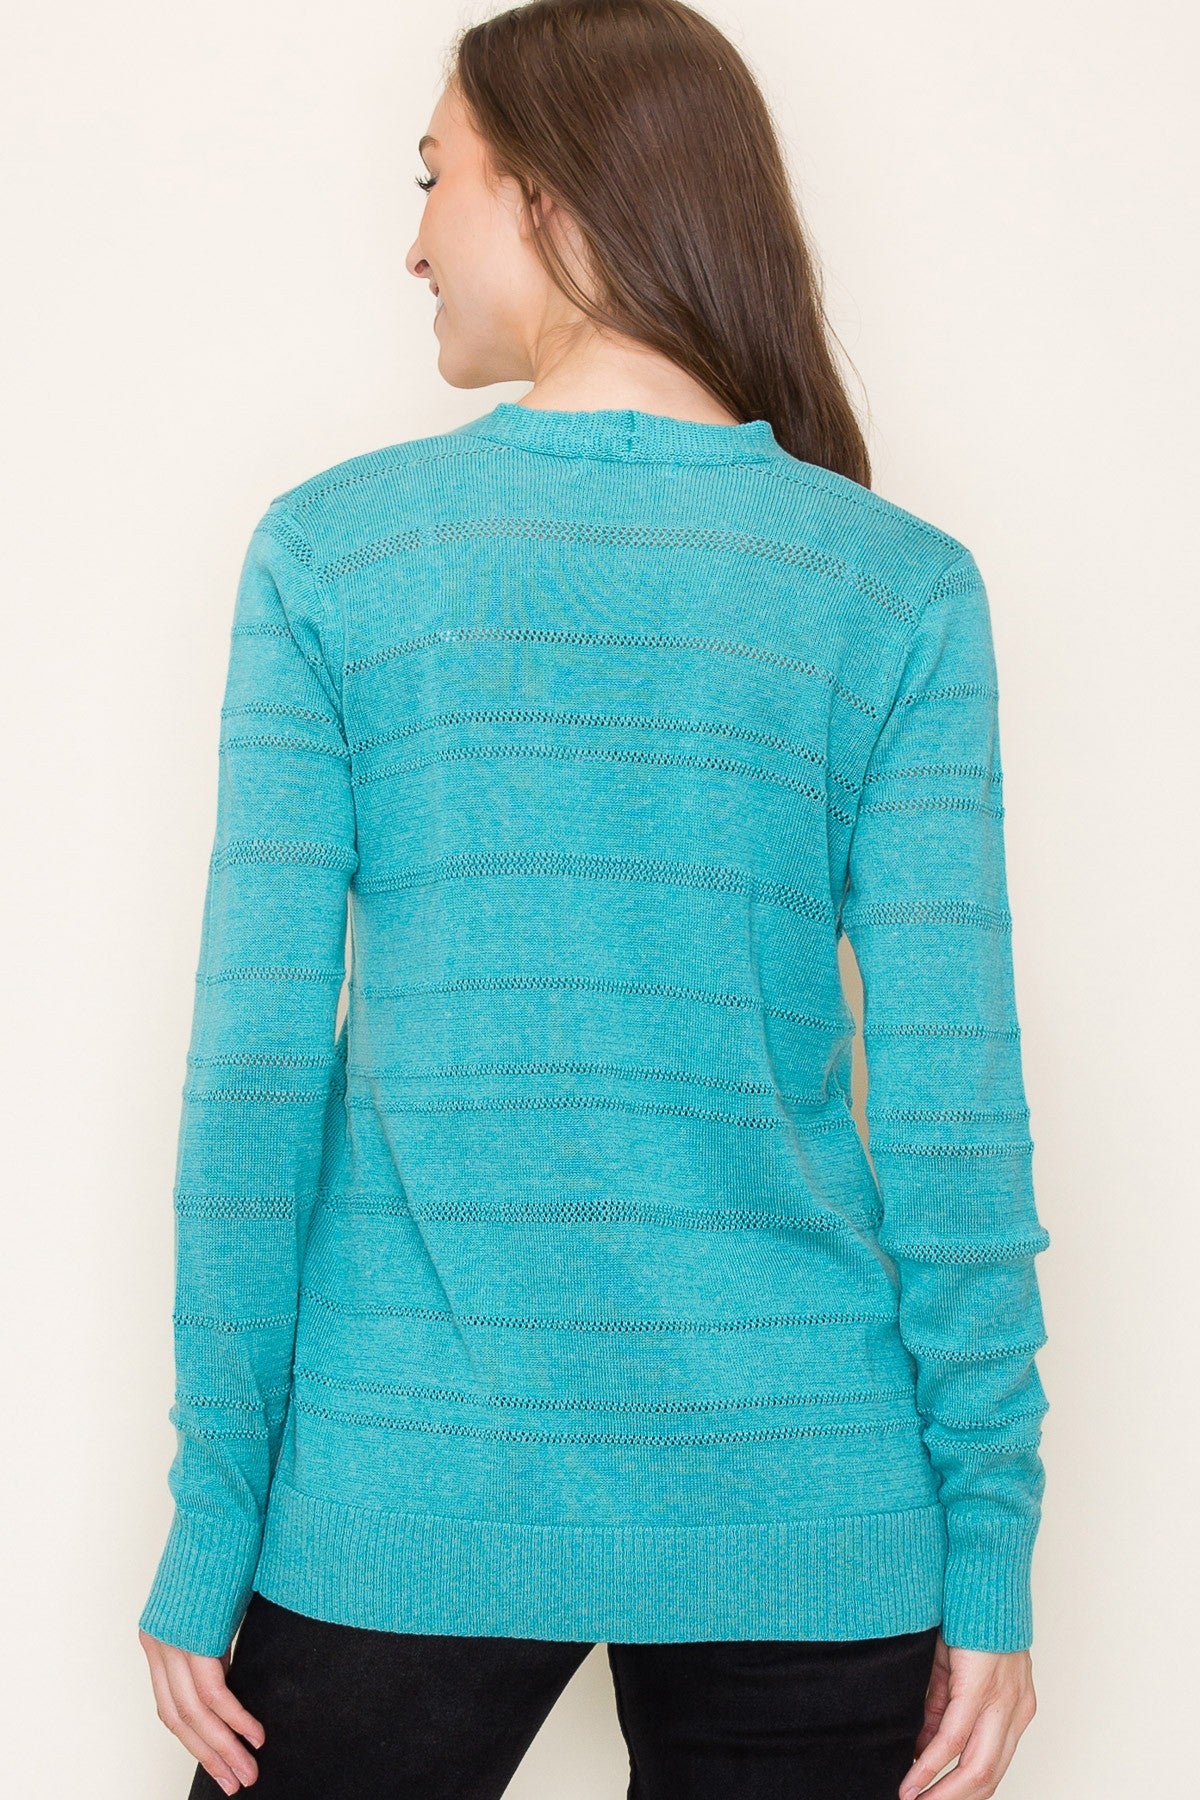 TEAL POINTELLE STRIPED OPEN FRONT CARDIGAN